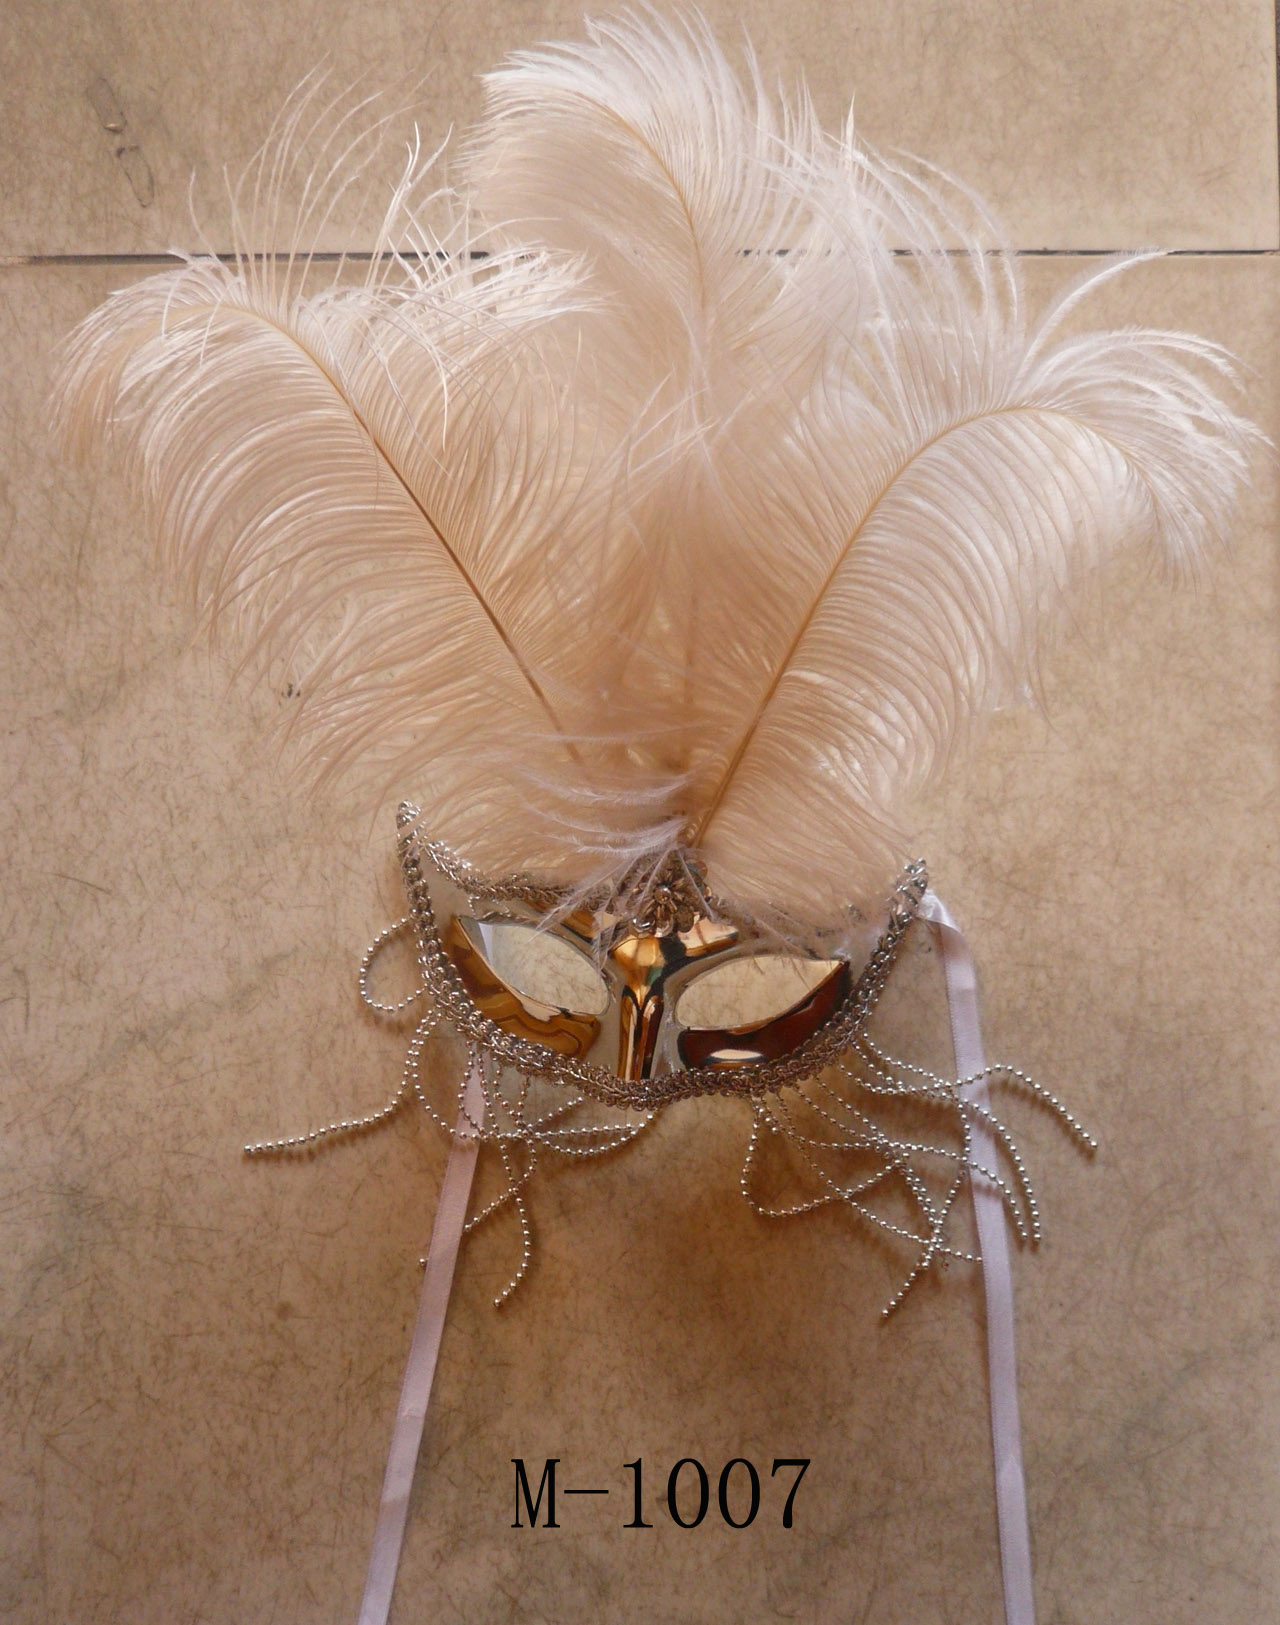 Cheap feather masks for sale - Made in China M-1007